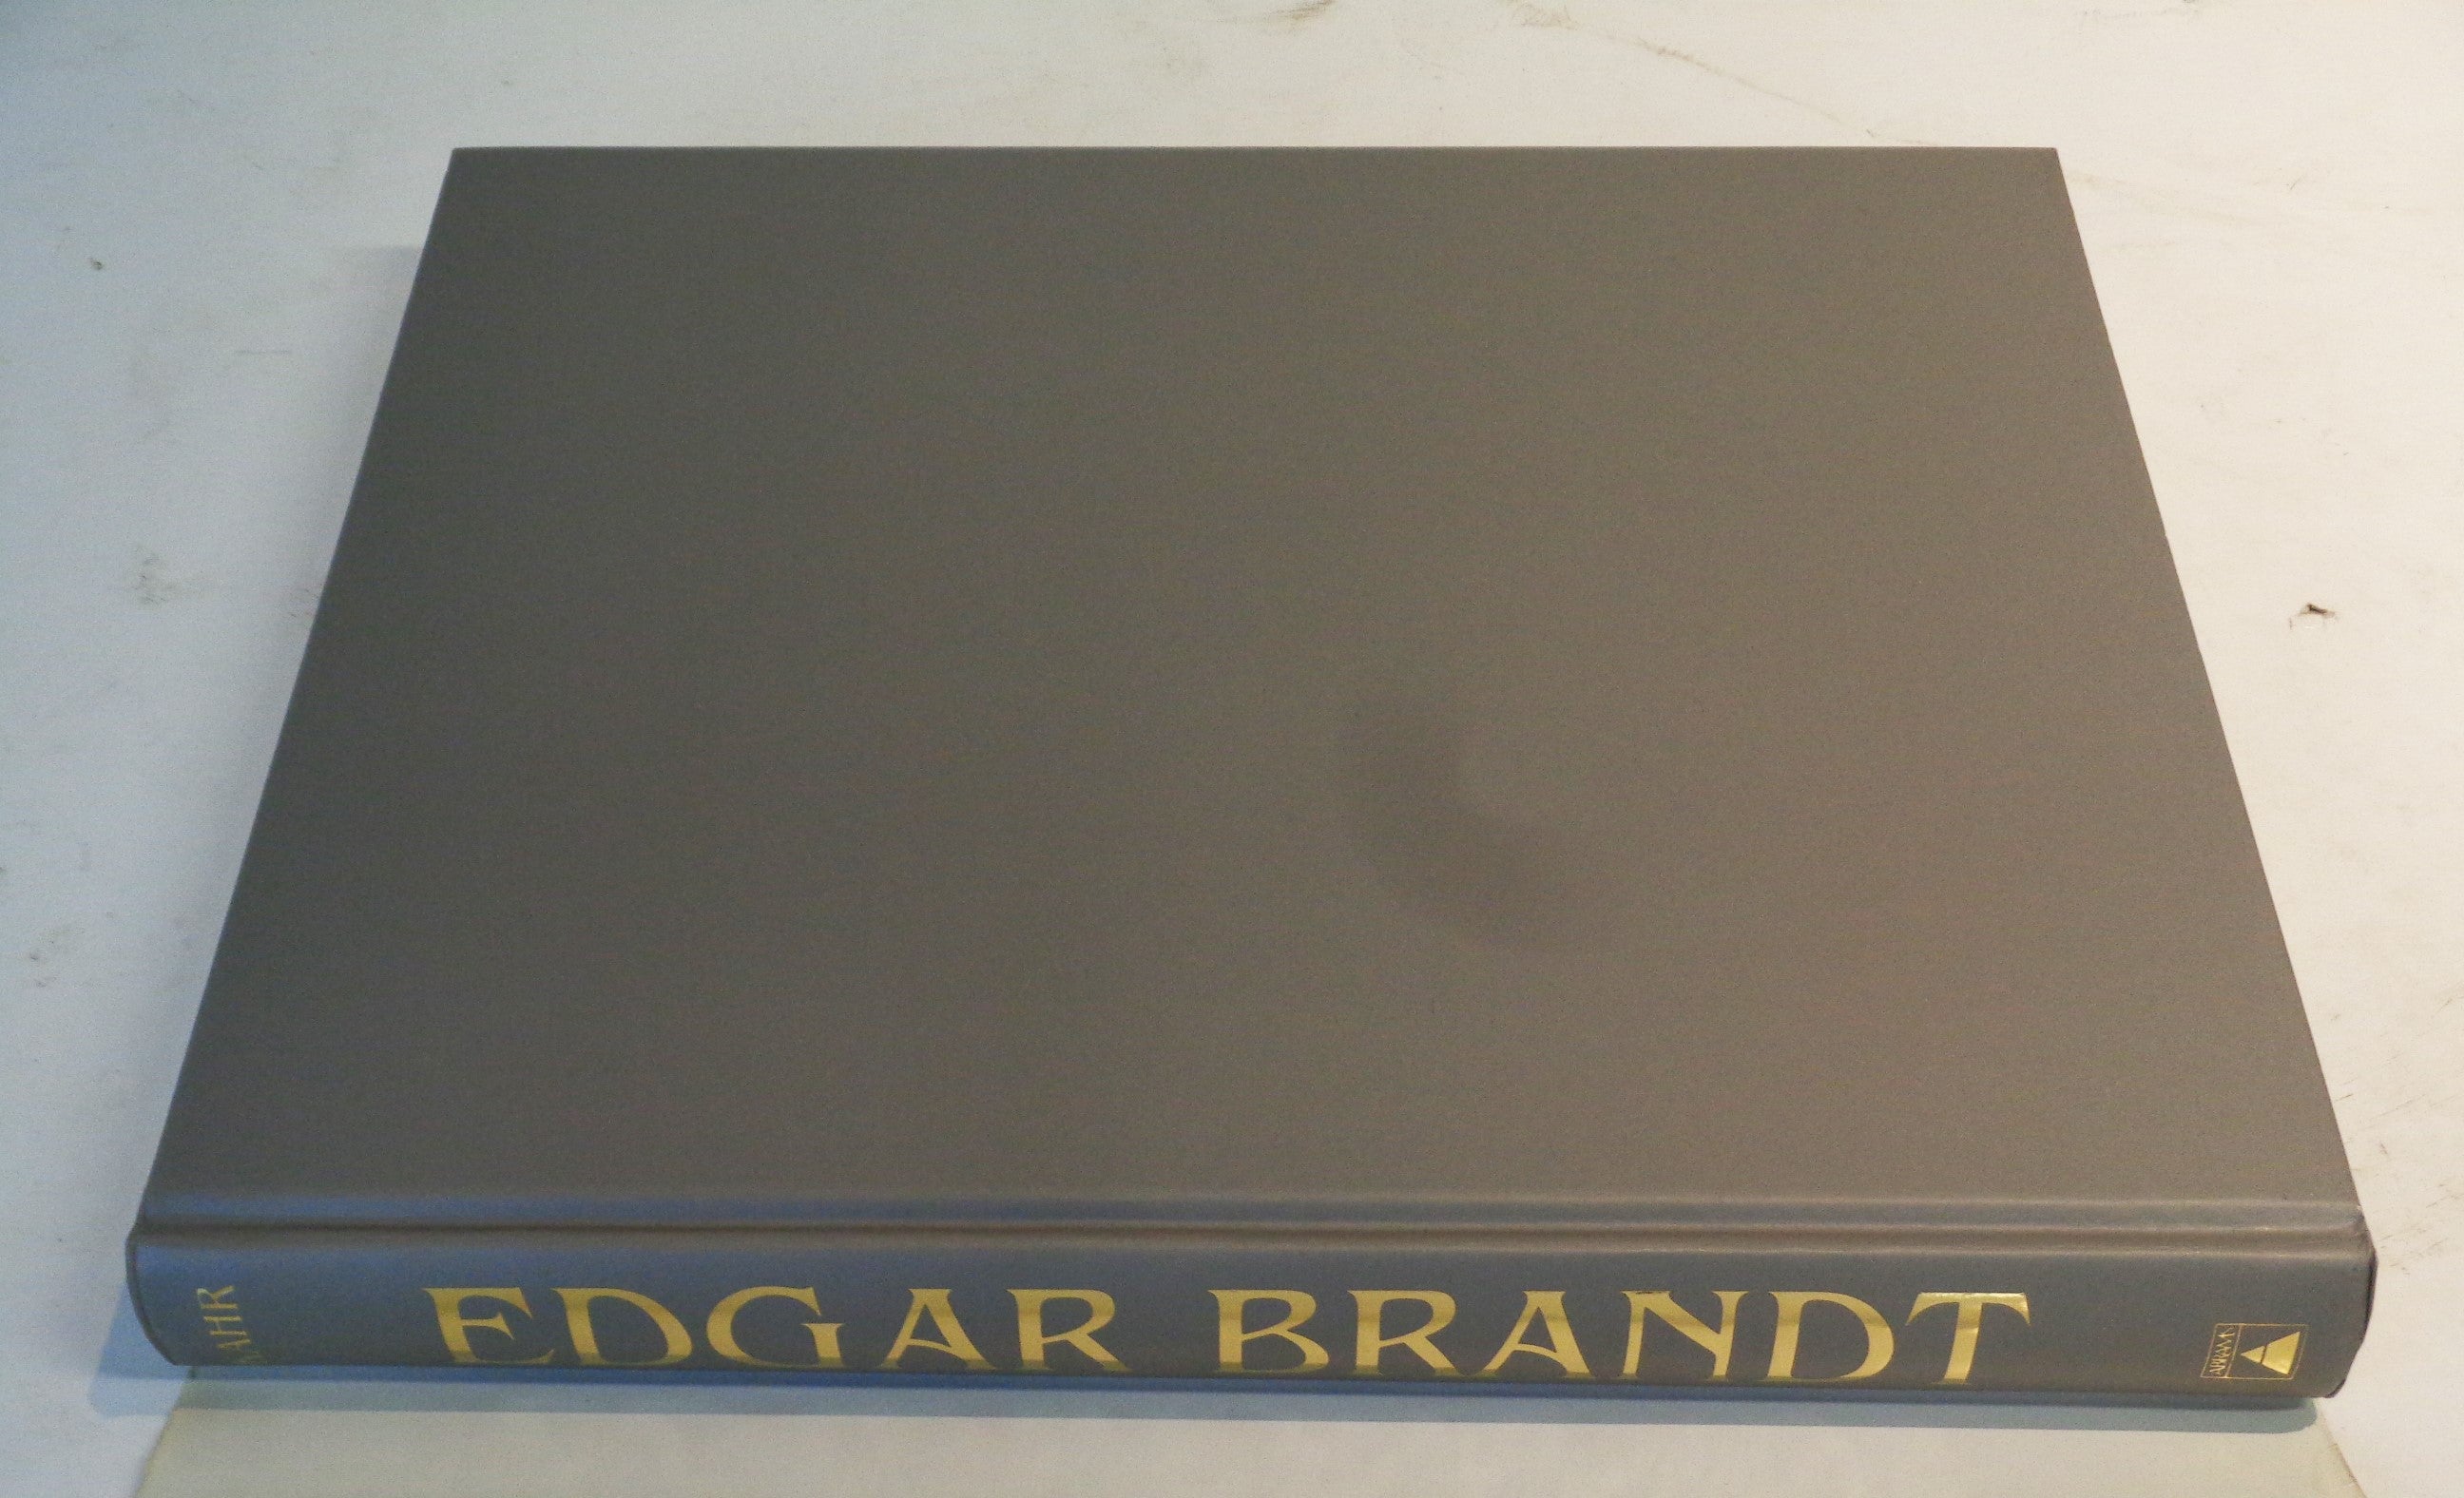 Edgar Brandt - Master of Art Deco Ironwork - Joan Kahr - 1999 Harry N. Abrams, Inc. Publishers. Hardcover cloth book w/ dustjacket. English text. The first book to document the life and work of the premier metalsmith of the 20th century ( Edgar